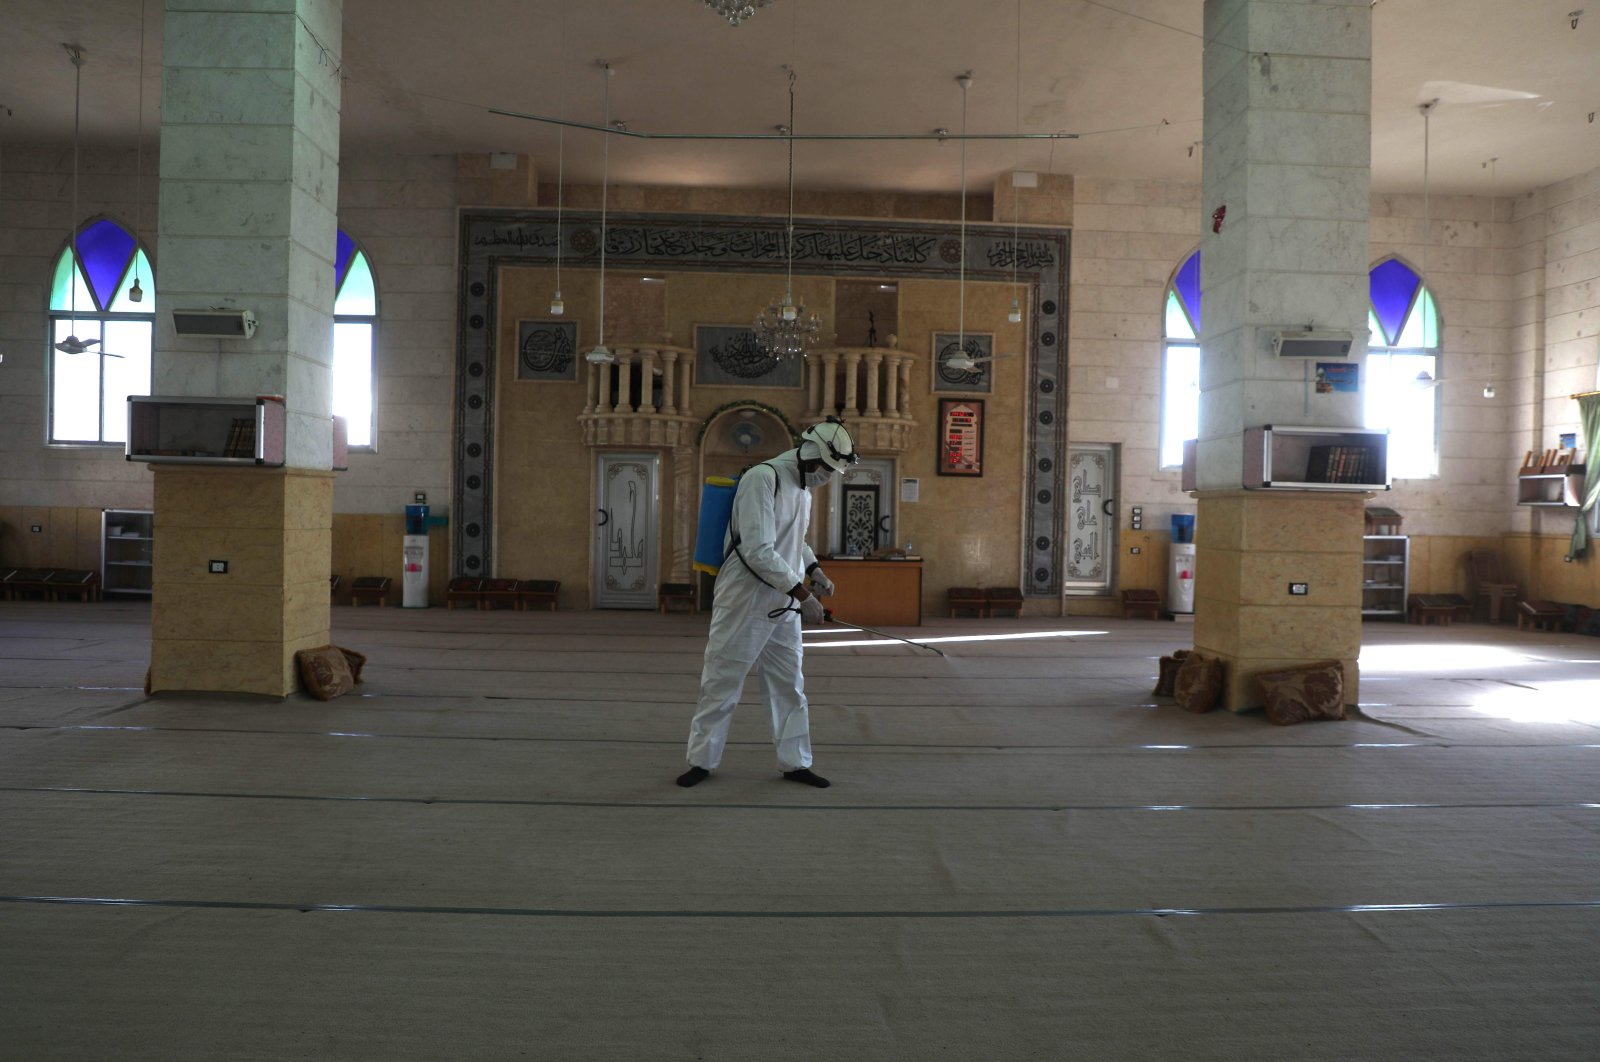 A member of the Syrian Civil Defence known as the "White Helmets" disinfects the interior of a mosque, as part of preventive measures taken against infections by the novel coronavirus, in the Syrian town of Dana, east of the Turkish-Syrian border in the northwestern Idlib province, Sunday, March 22, 2020.  (AFP)